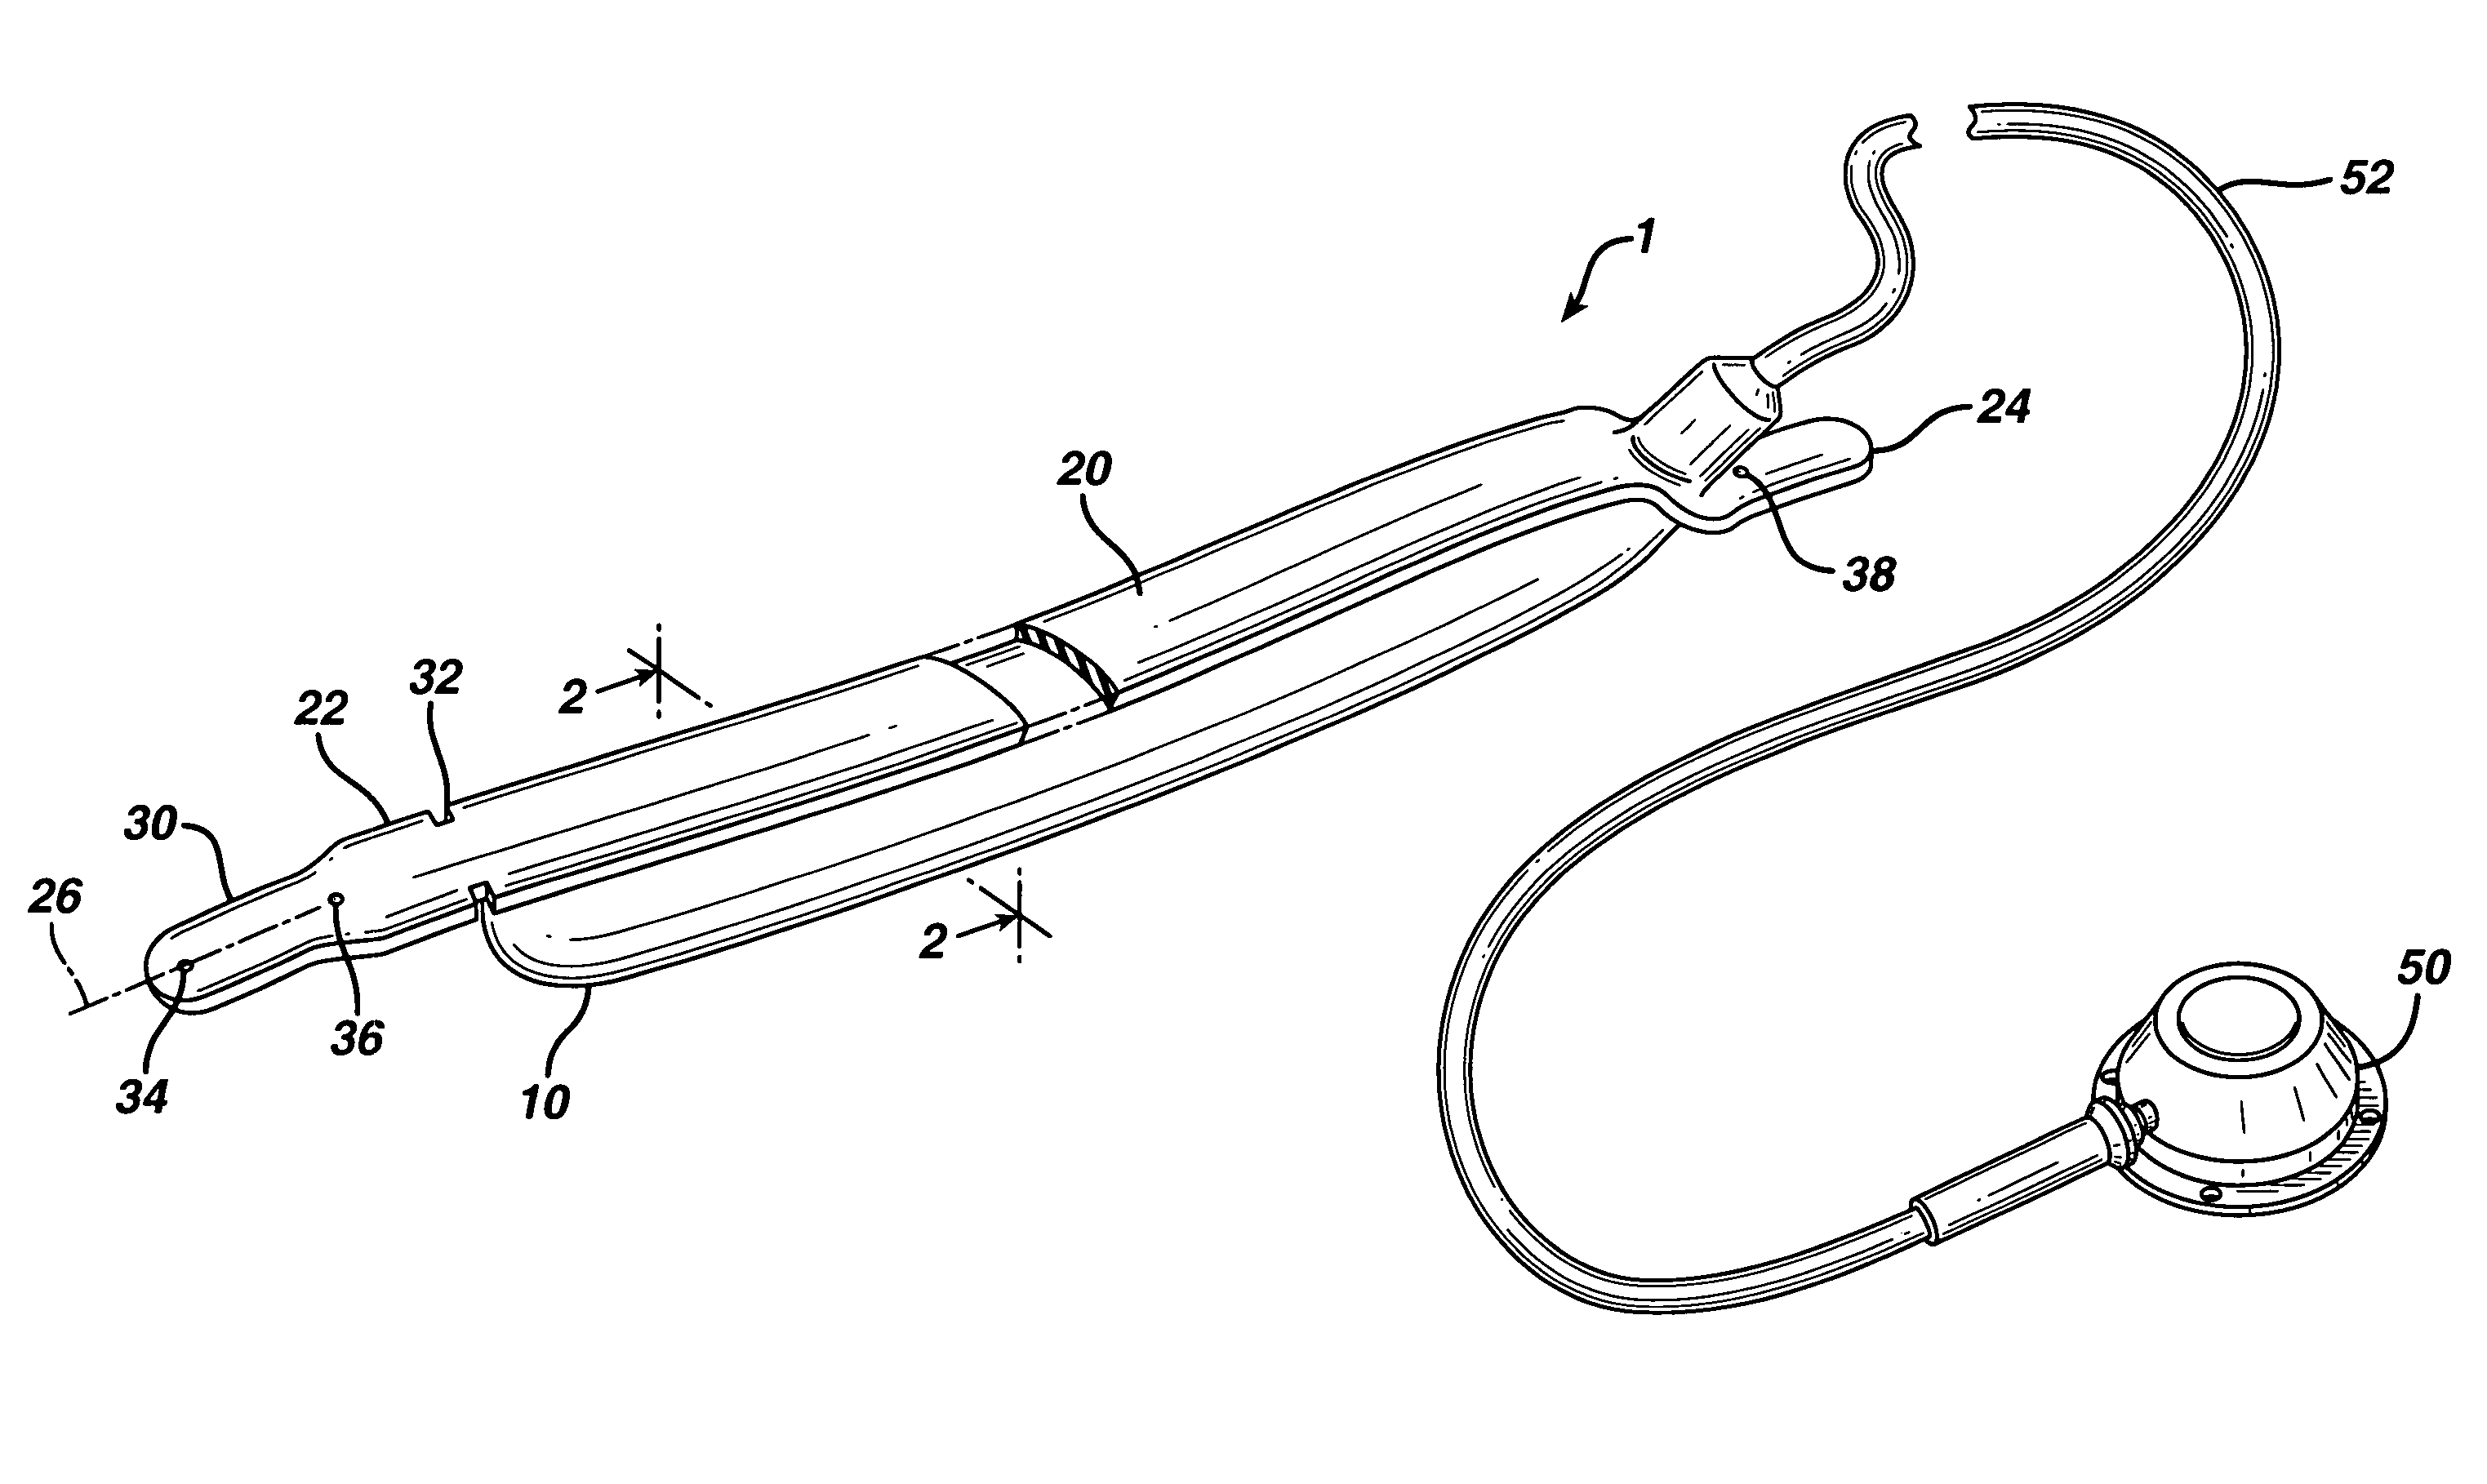 Surgically implantable adjustable band having a flat profile when implanted